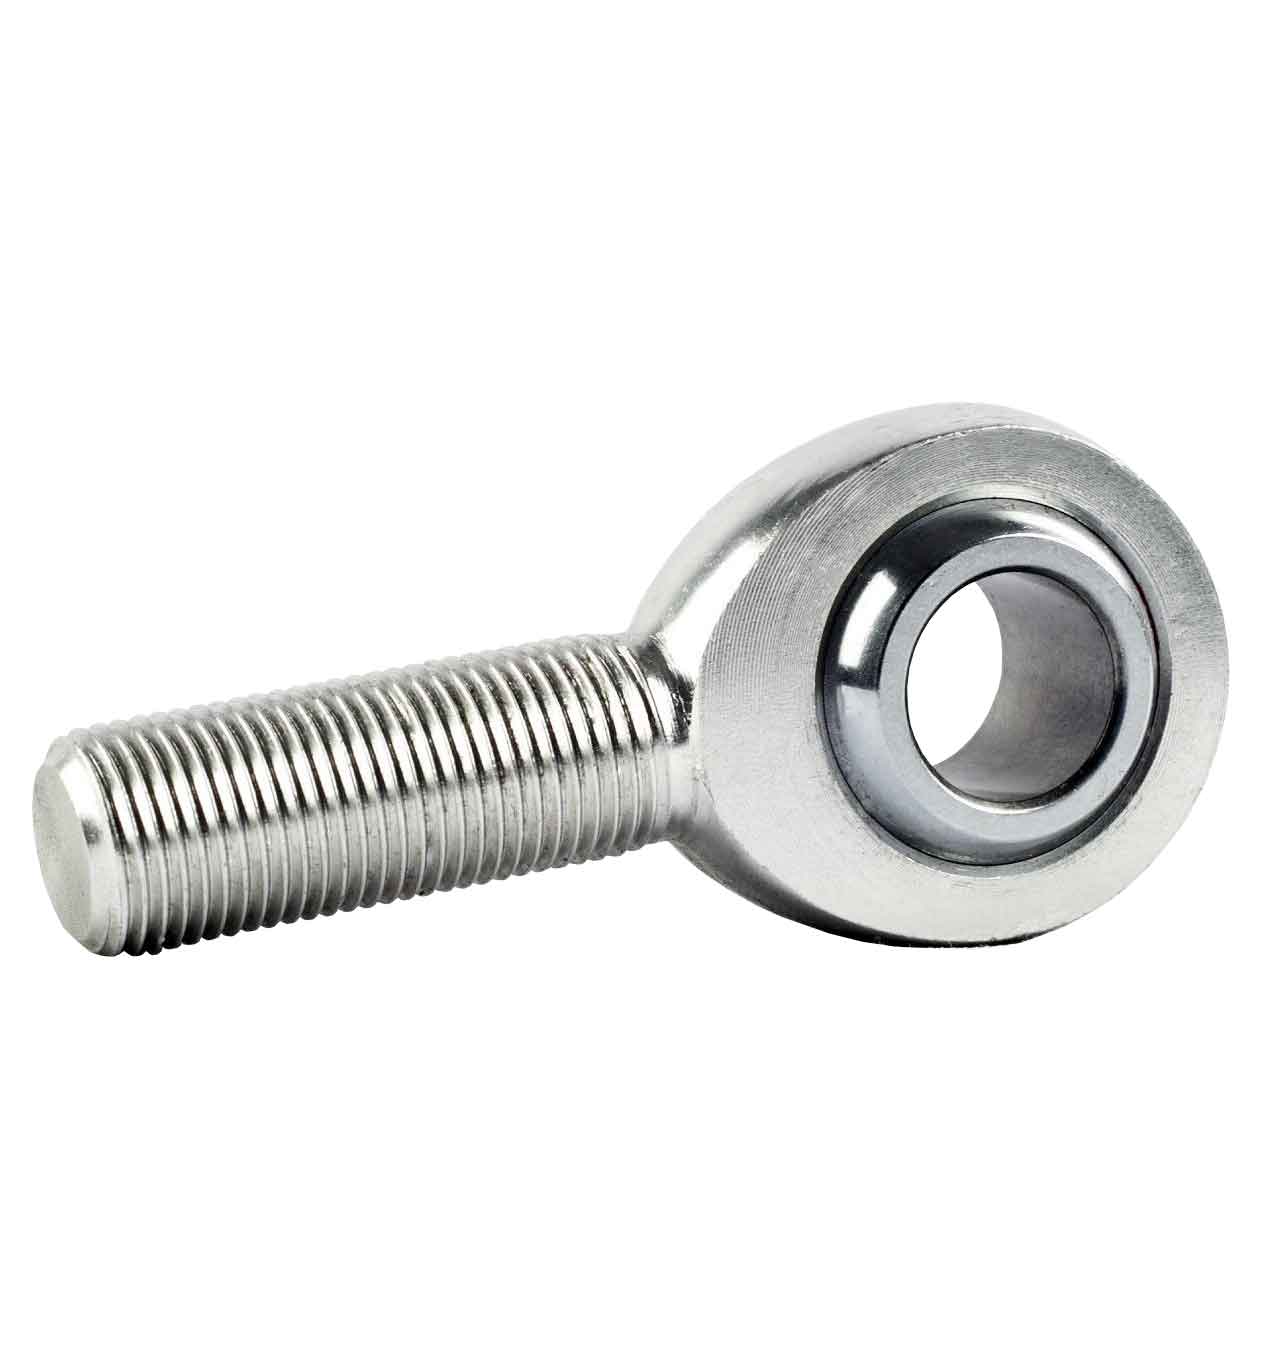 SS-POS25 GENERIC 25mm M24X2 STAINLESS STEEL MALE ROD END BEARING Thumbnail